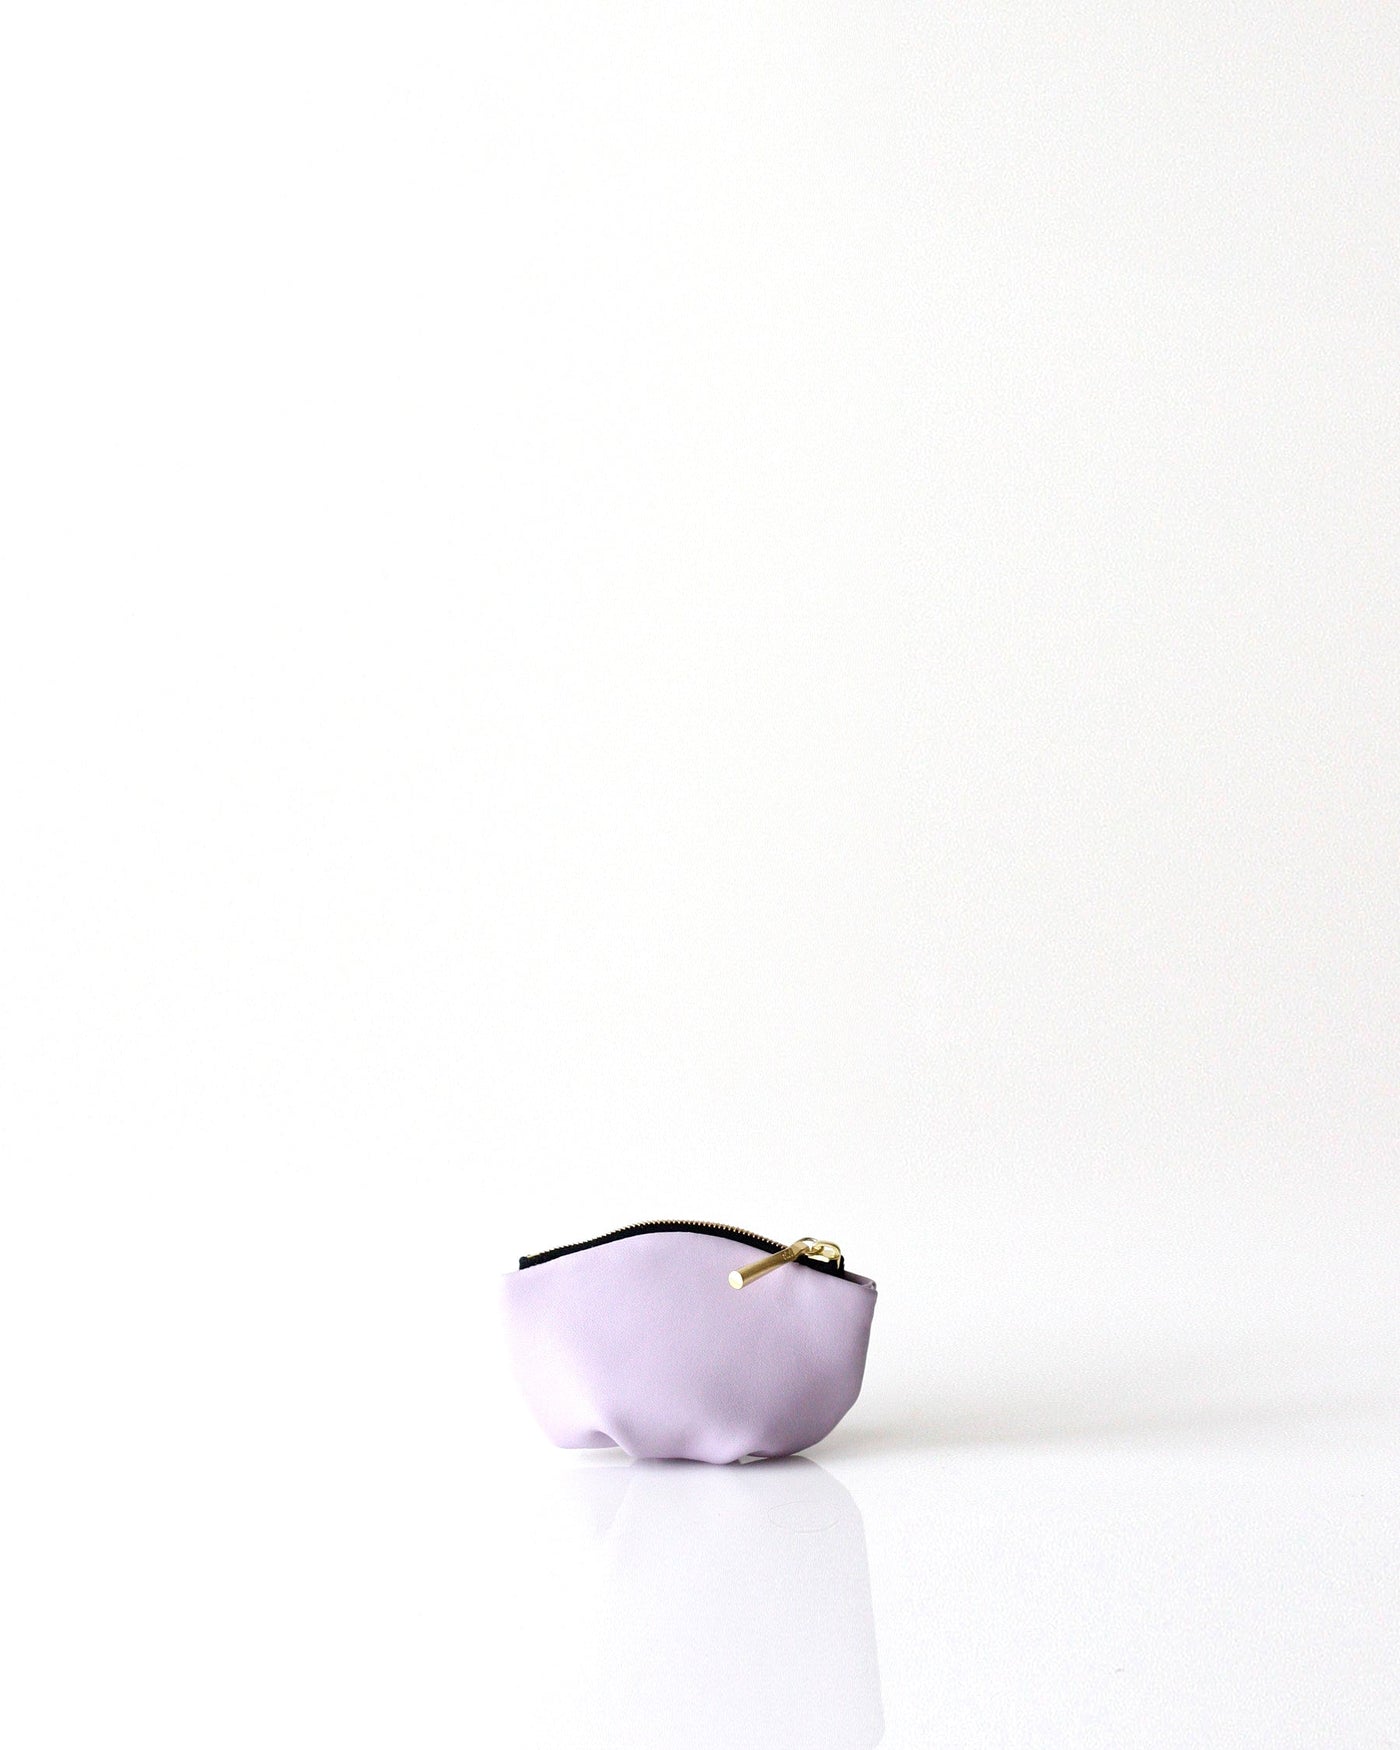 Baby Pochette Coin Purse | Lilas - Opelle bag AW22 - Opelle leather handbag handcrafted leather bag toronto Canada